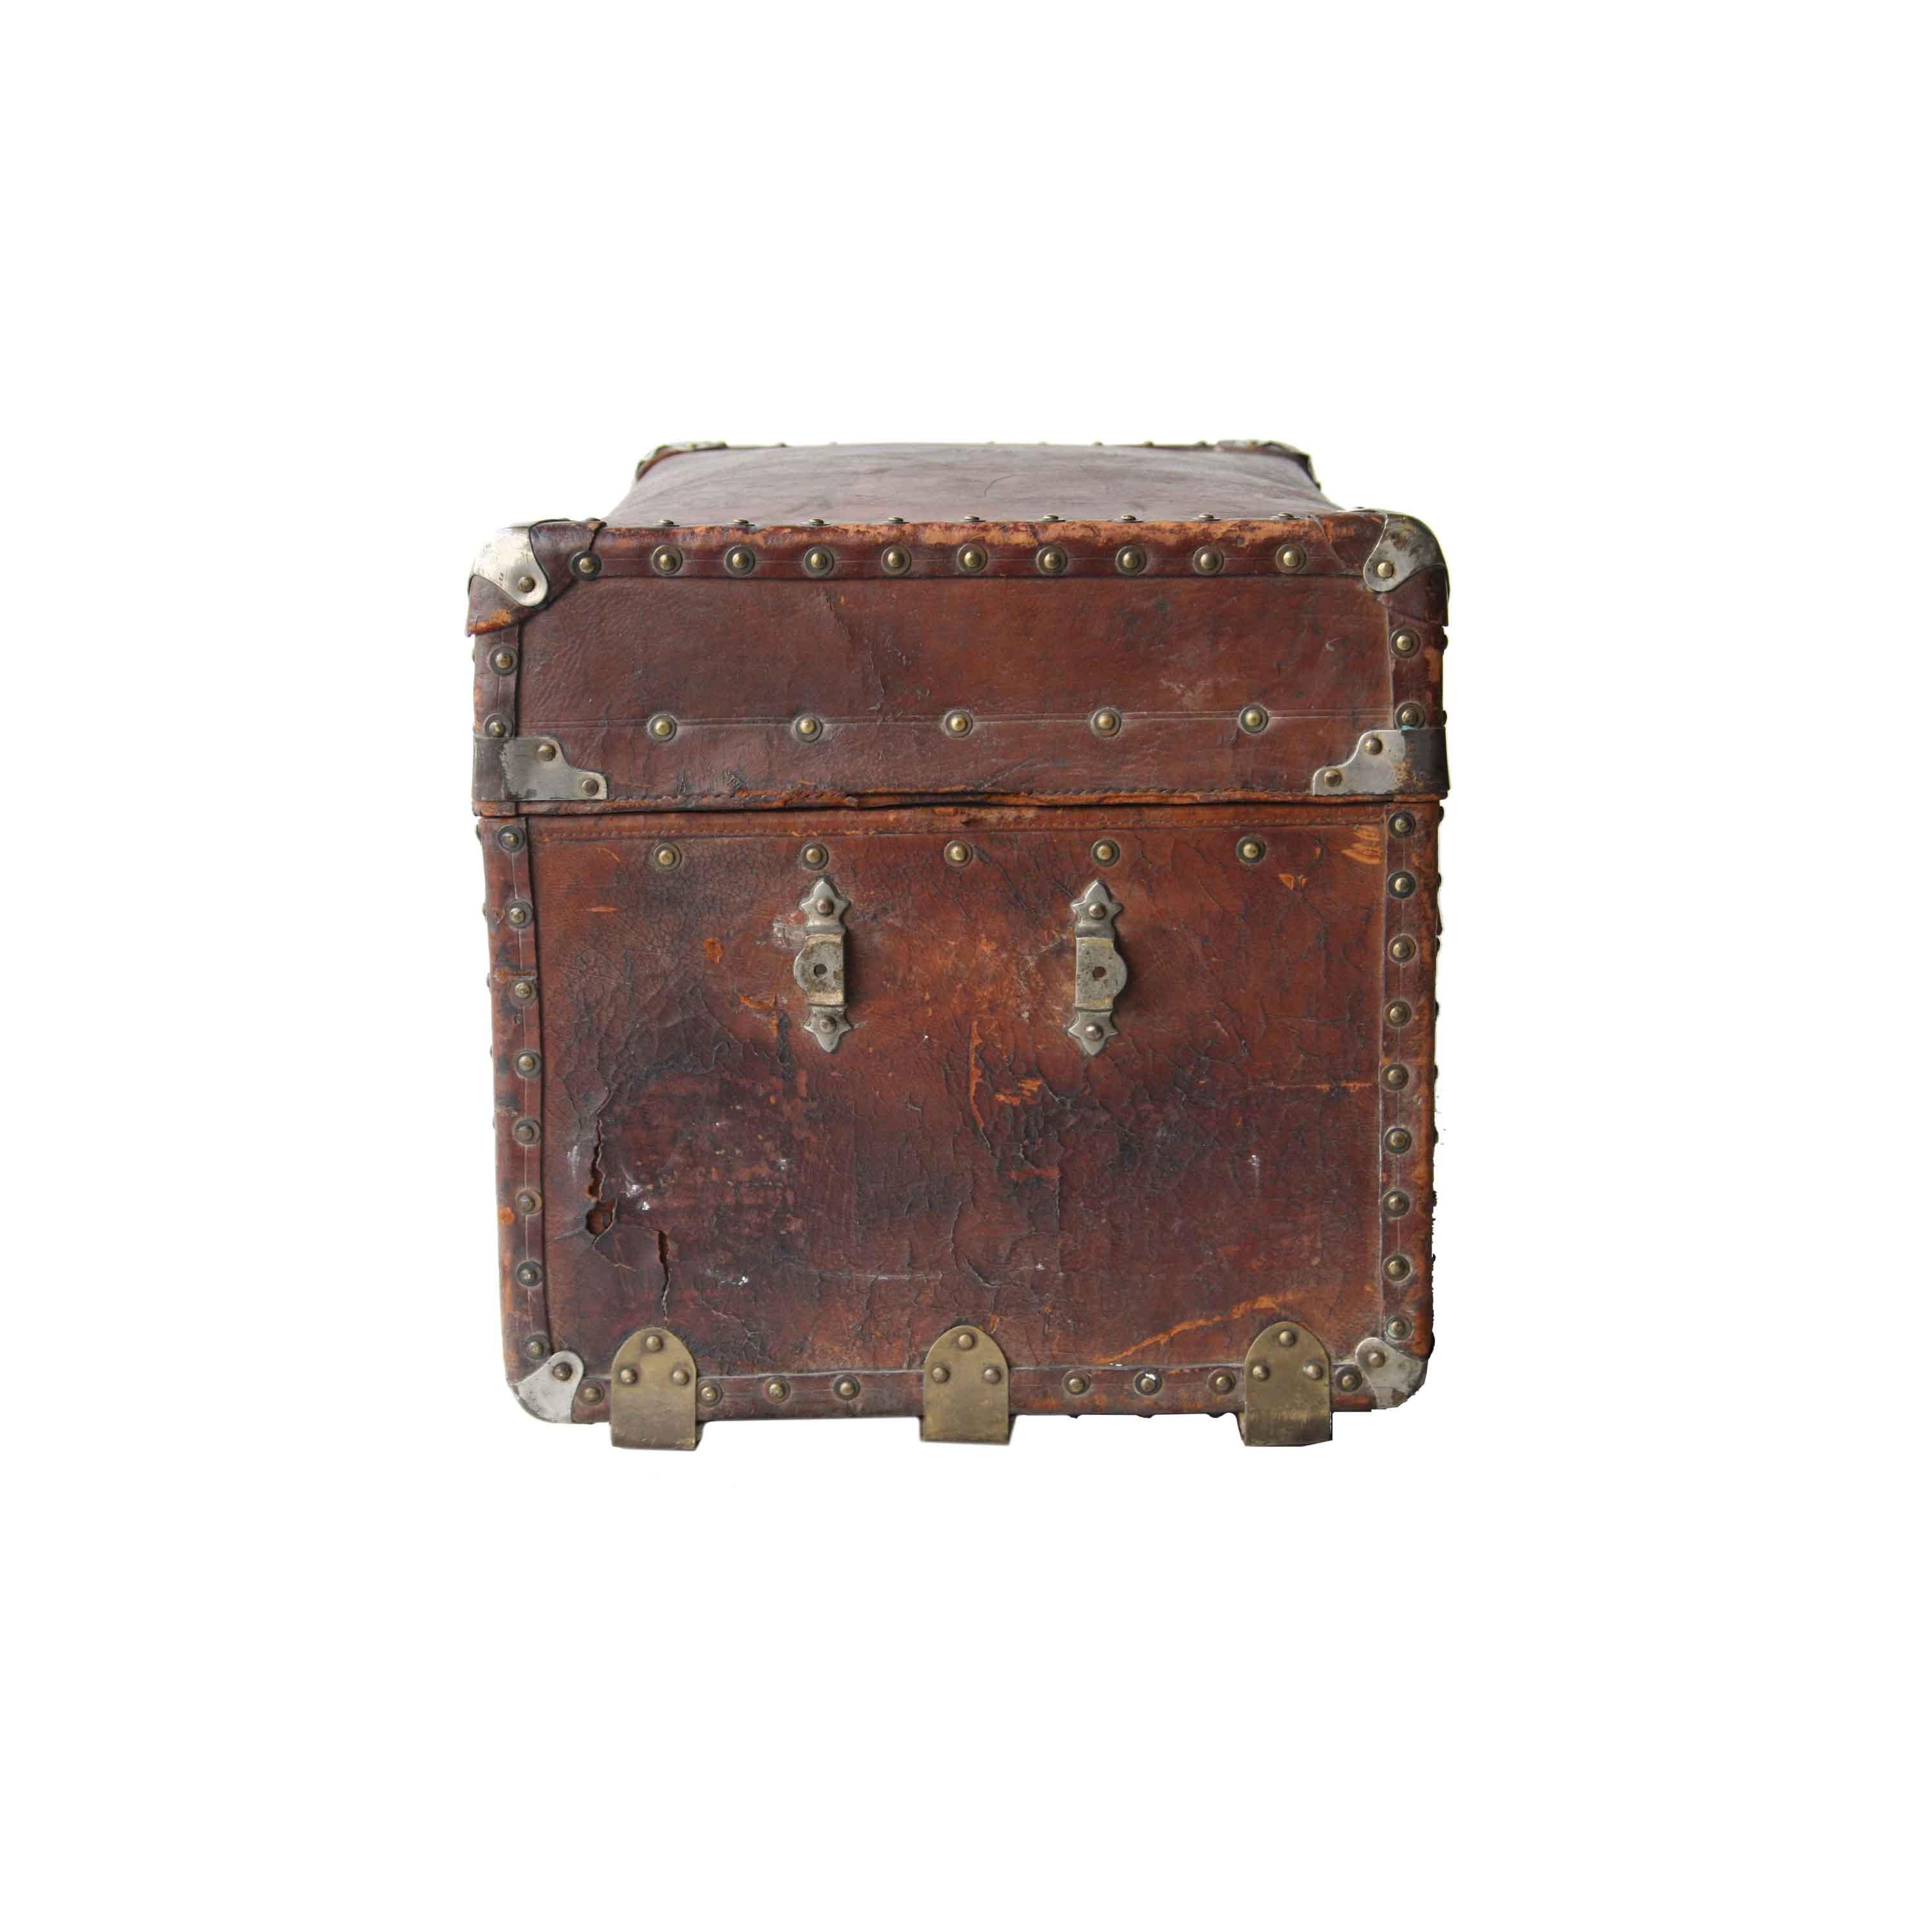 Spanish Colonial 20th Century Leather Metal Haitian Trunk